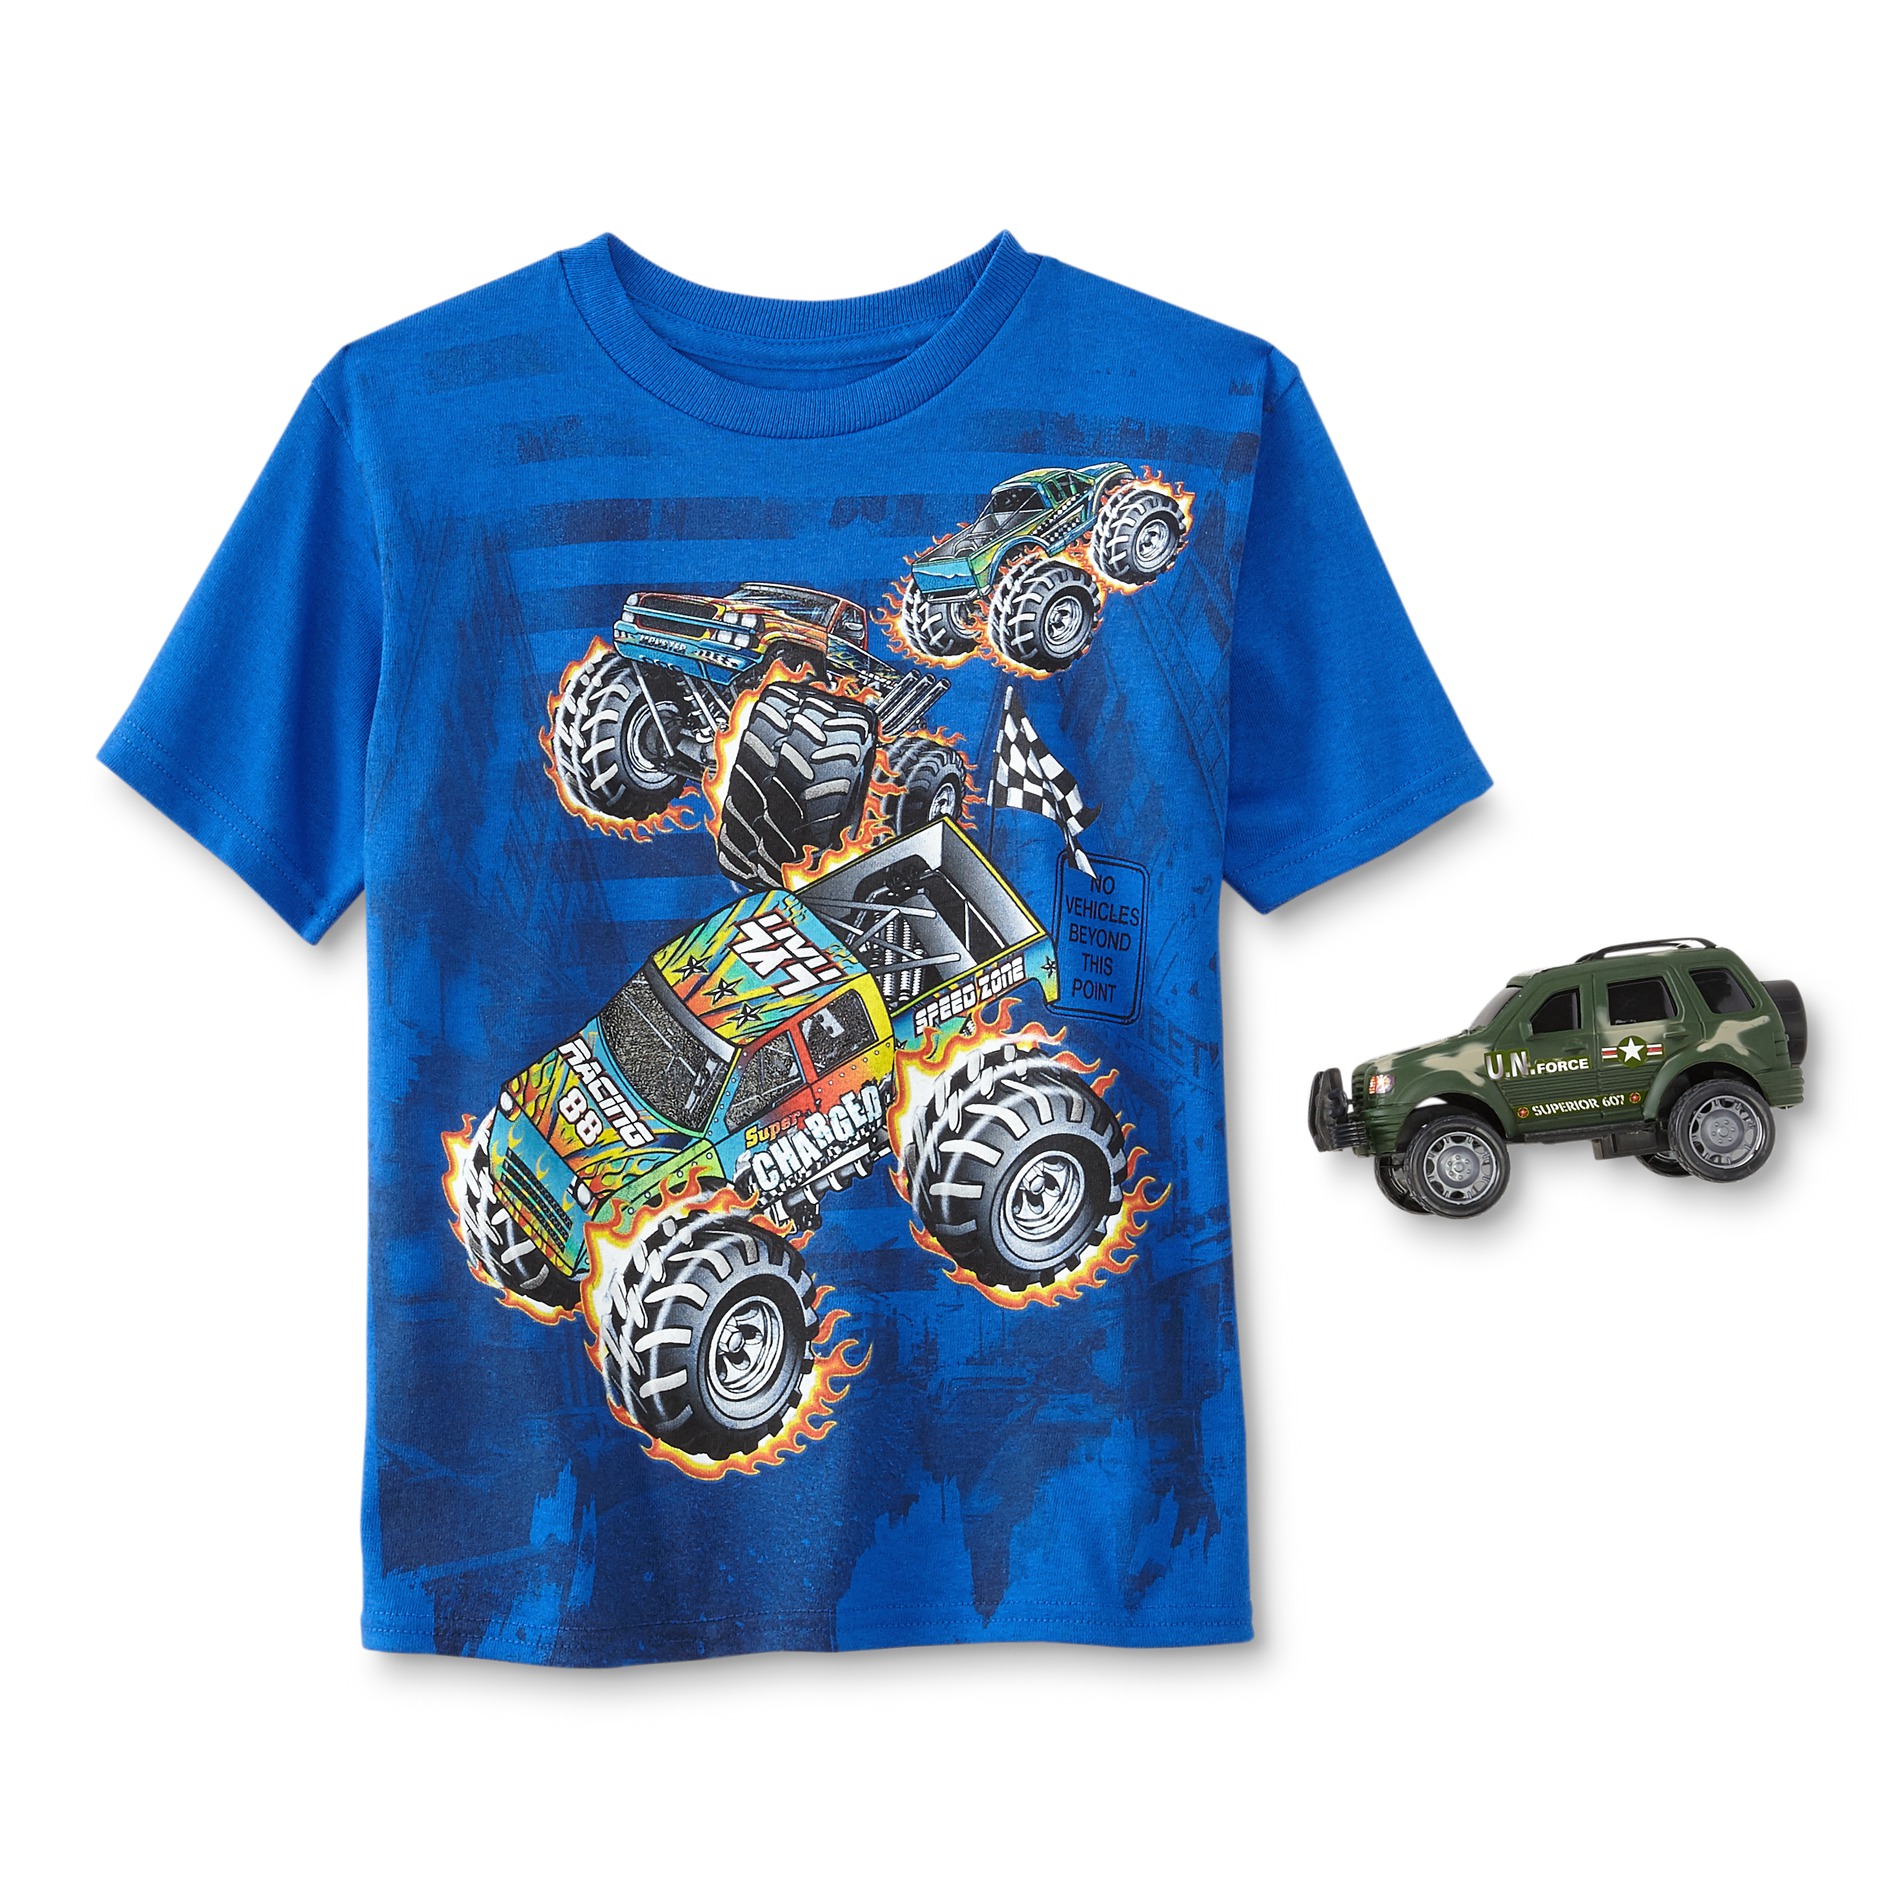 Boys' Graphic T-Shirt & Toy - Monster Truck